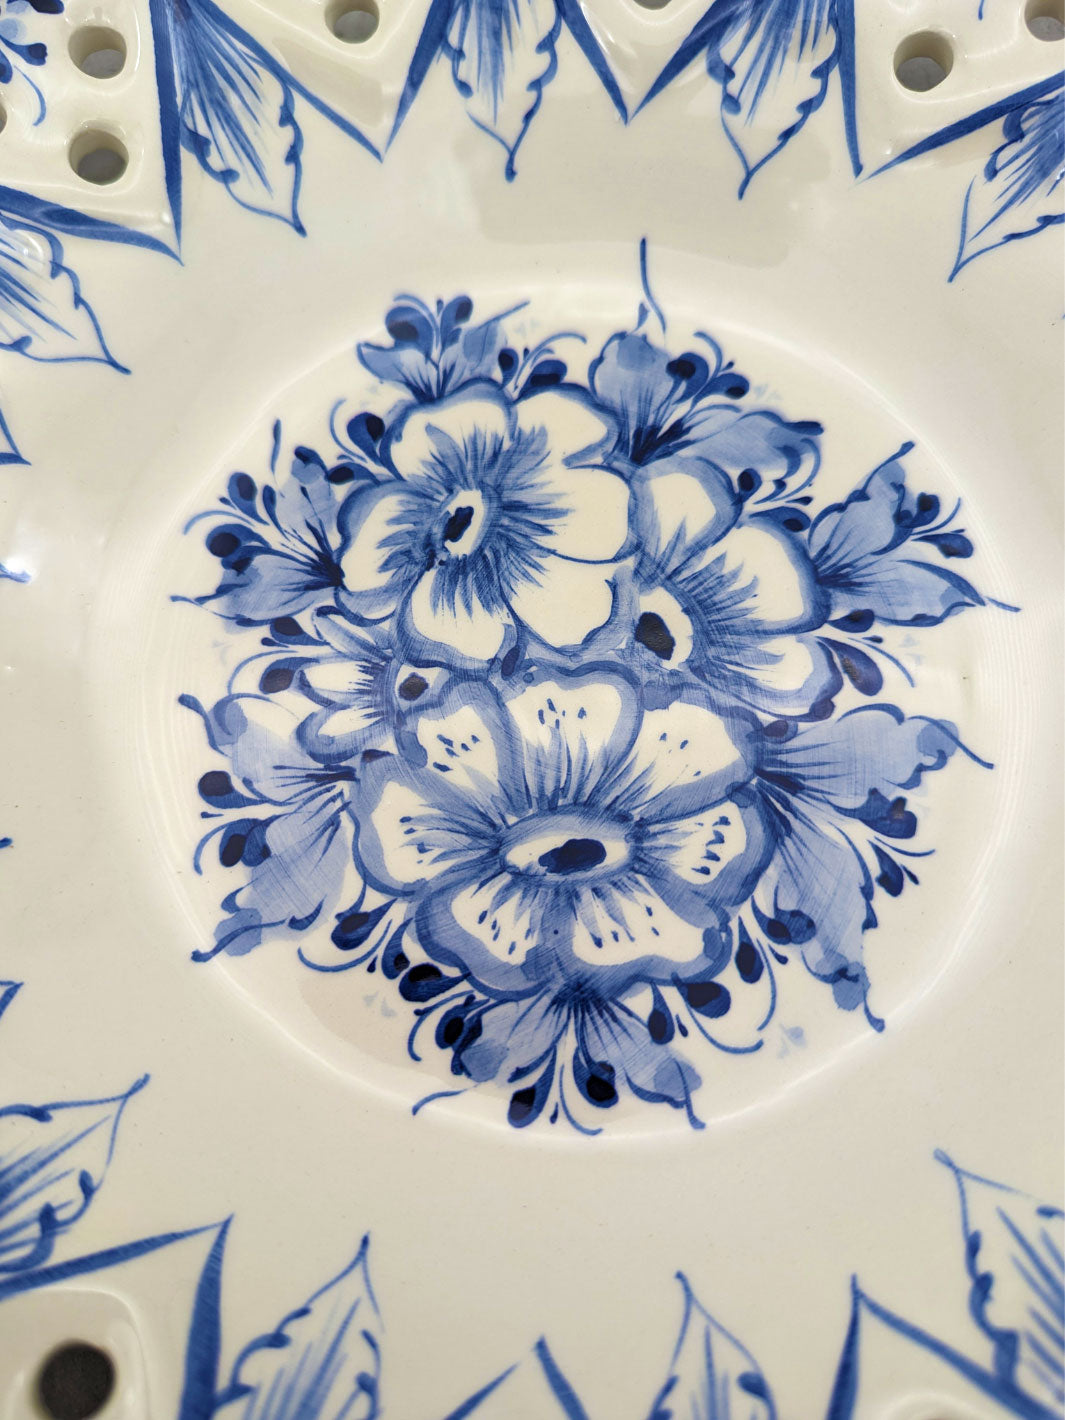 11.5 Inch Hand painted Blue and White Alcobaça Ceramic Decorative Plate Border Hearts